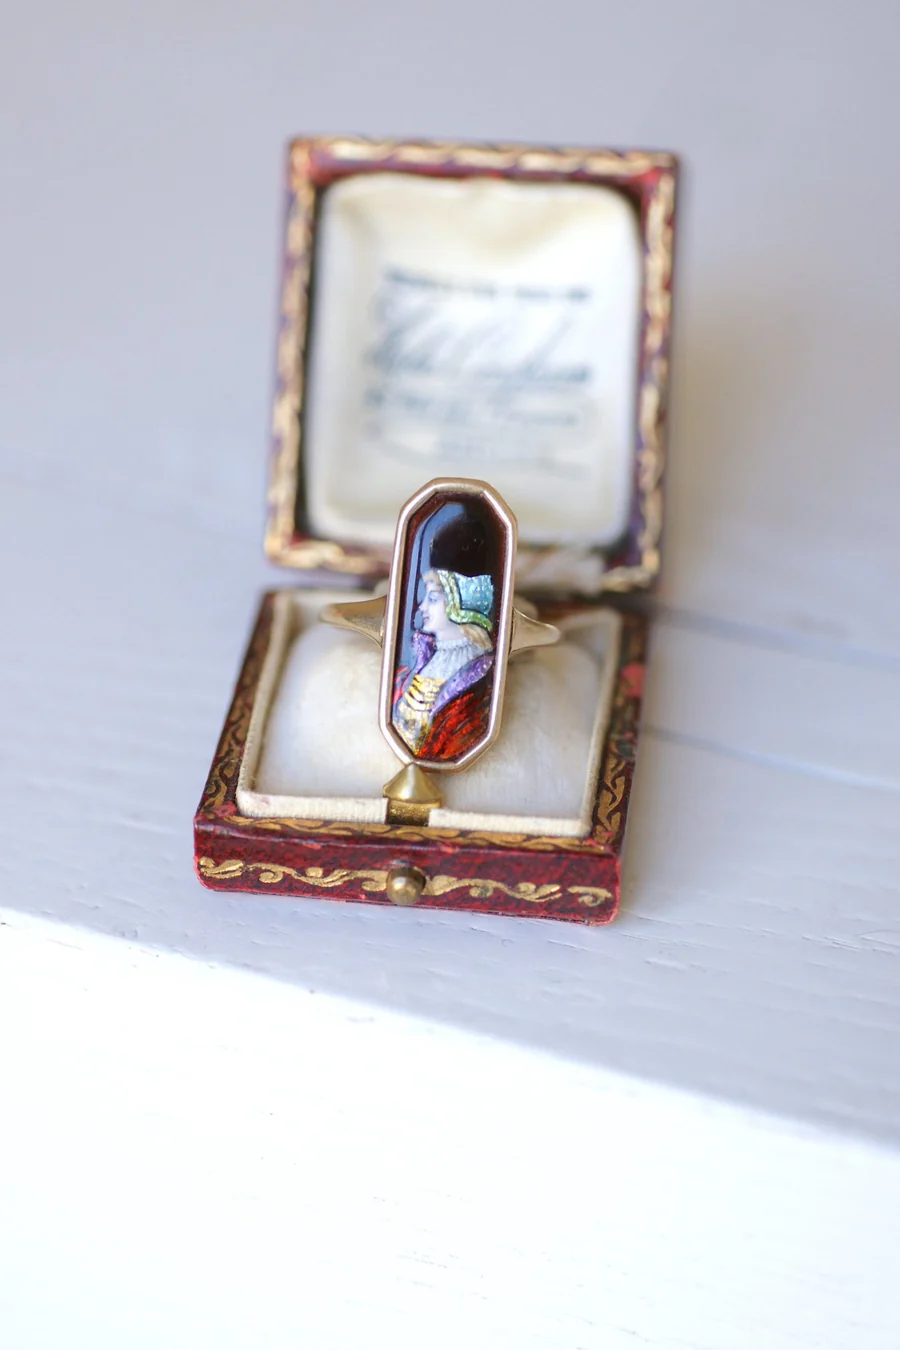 Large antique gold and enamel ring from Limoges - Galerie Pénélope